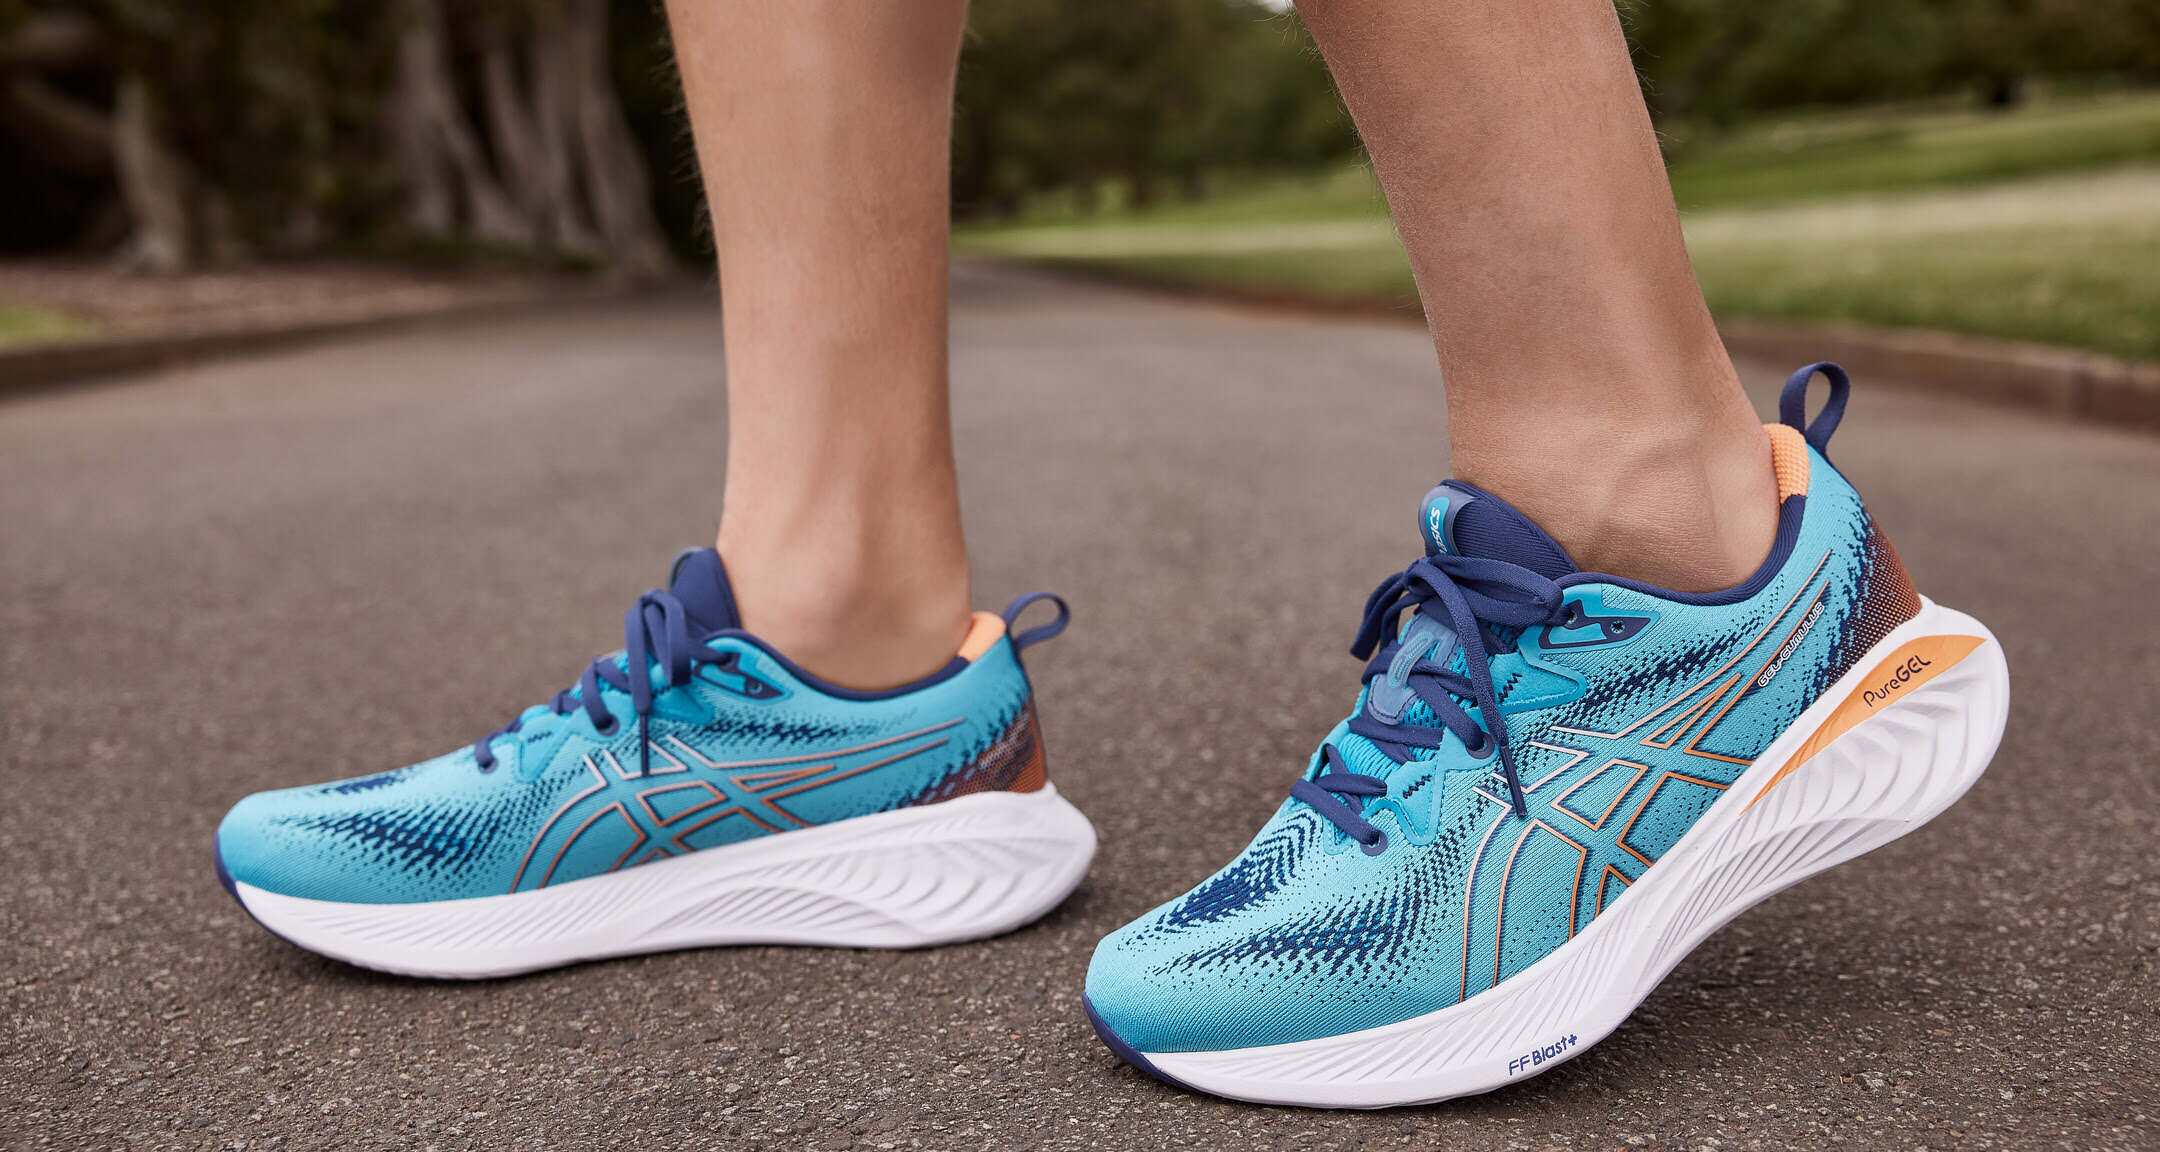 Best Running Shoes For Treadmill 2020 